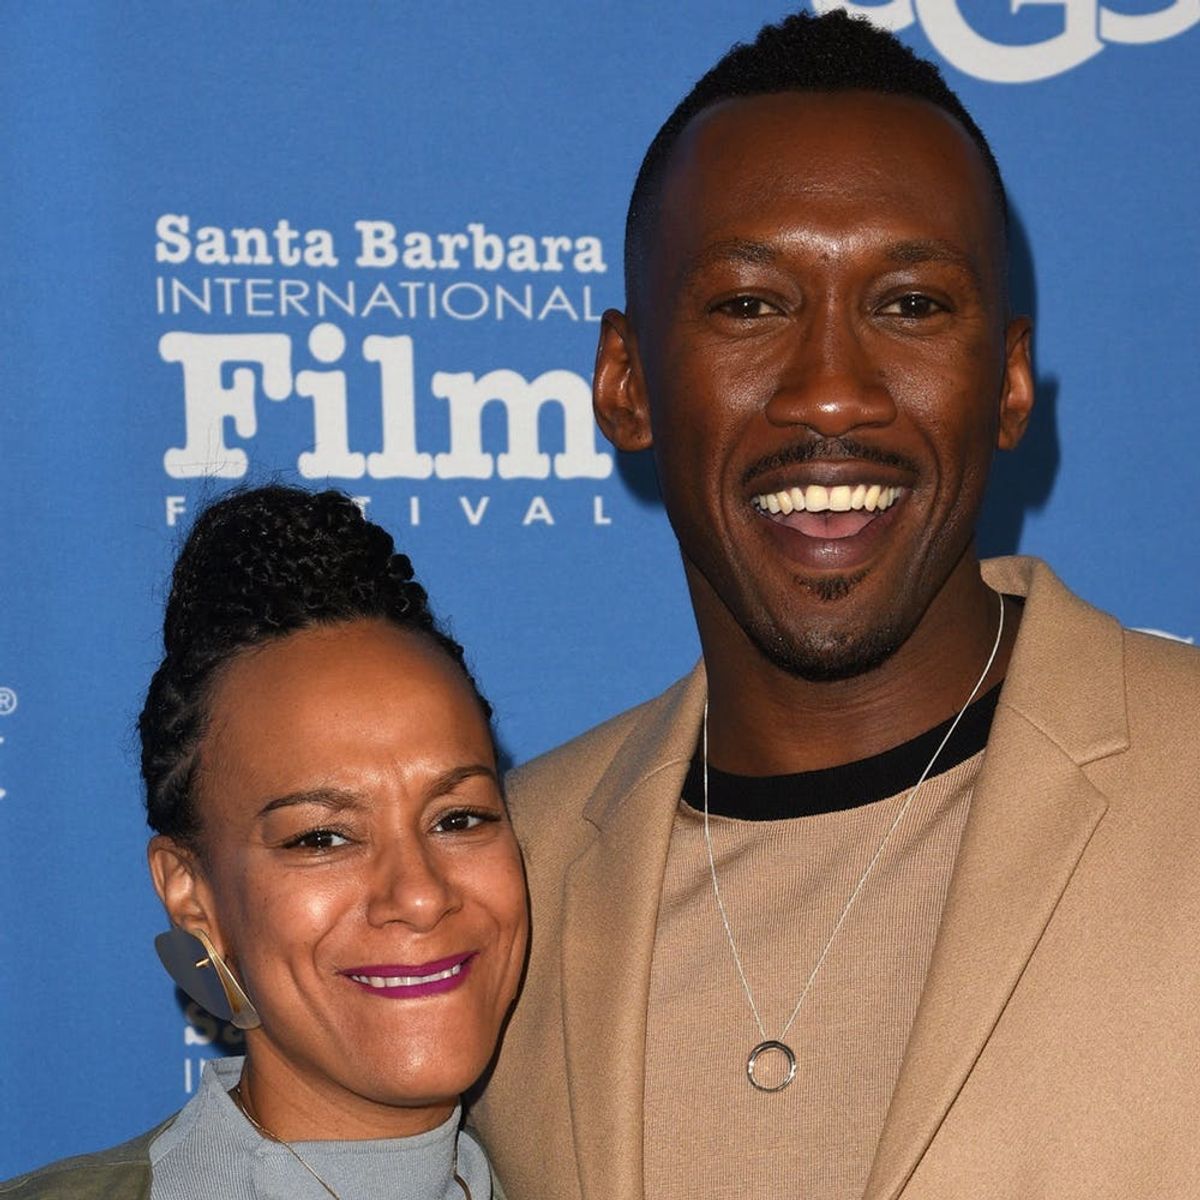 Oscar Nominee Mahershala Ali Just Welcomed a Baby Two Days Before the Ceremony